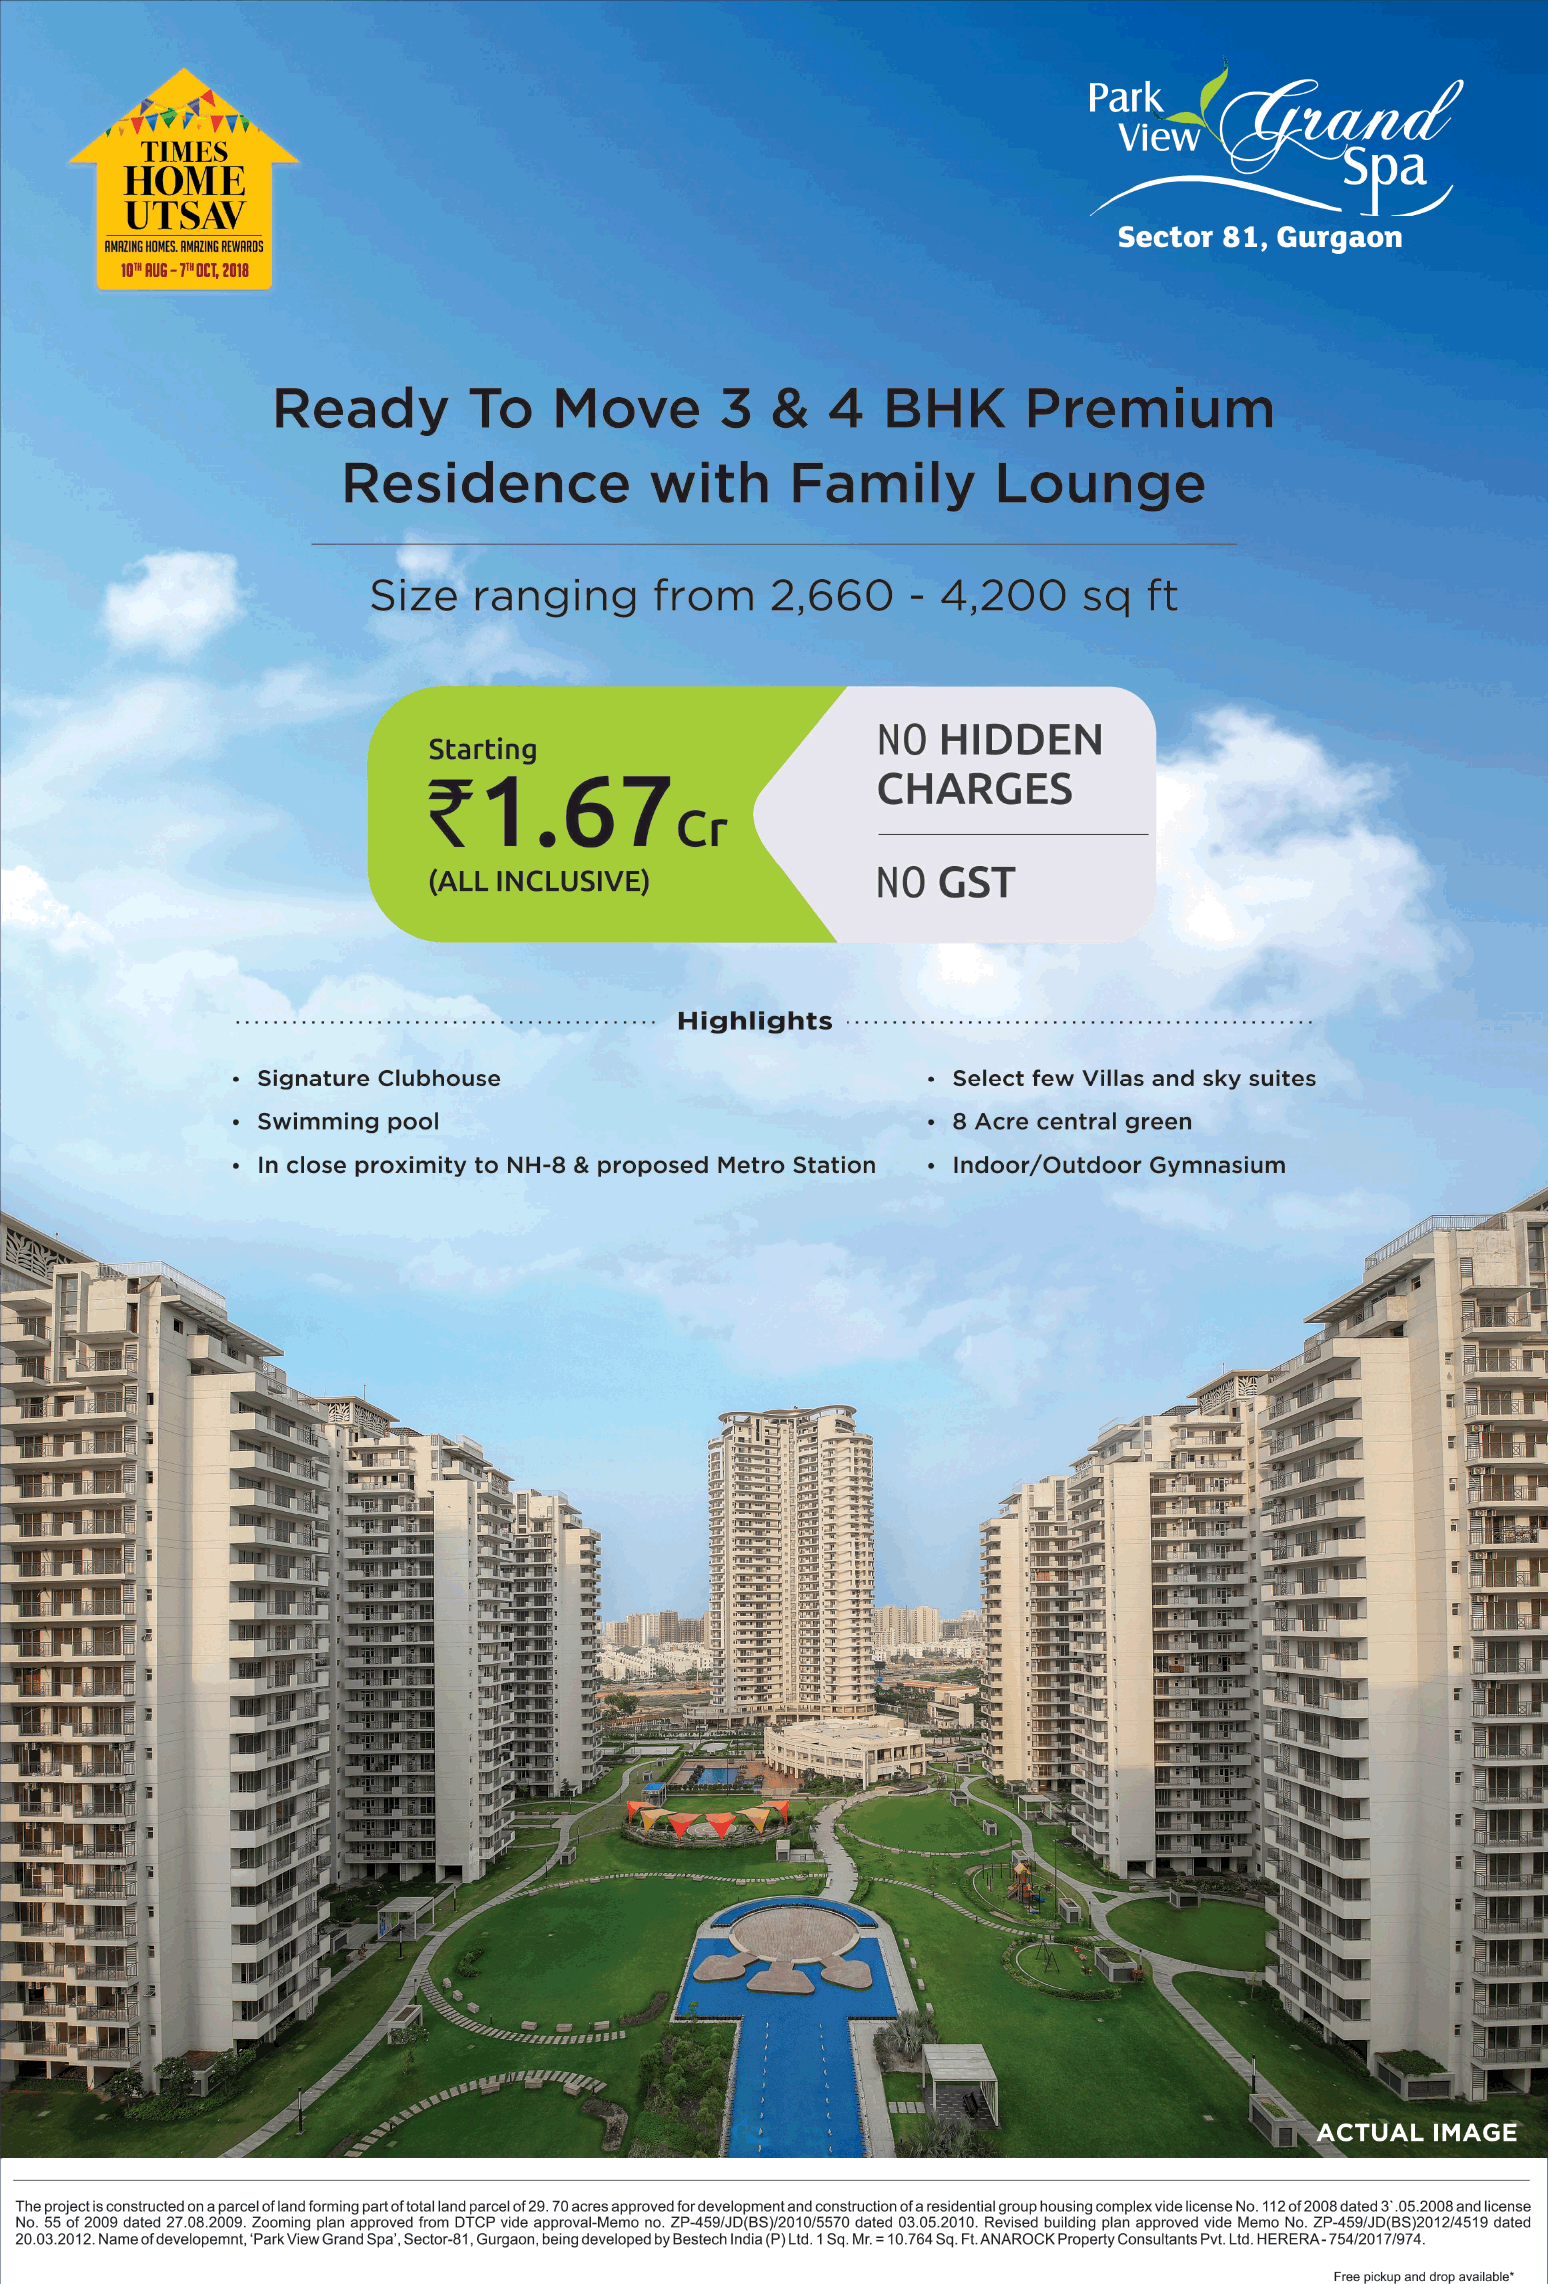 Book premium residency with no GST at Bestech Park View Grand Spa in Gurgaon Update